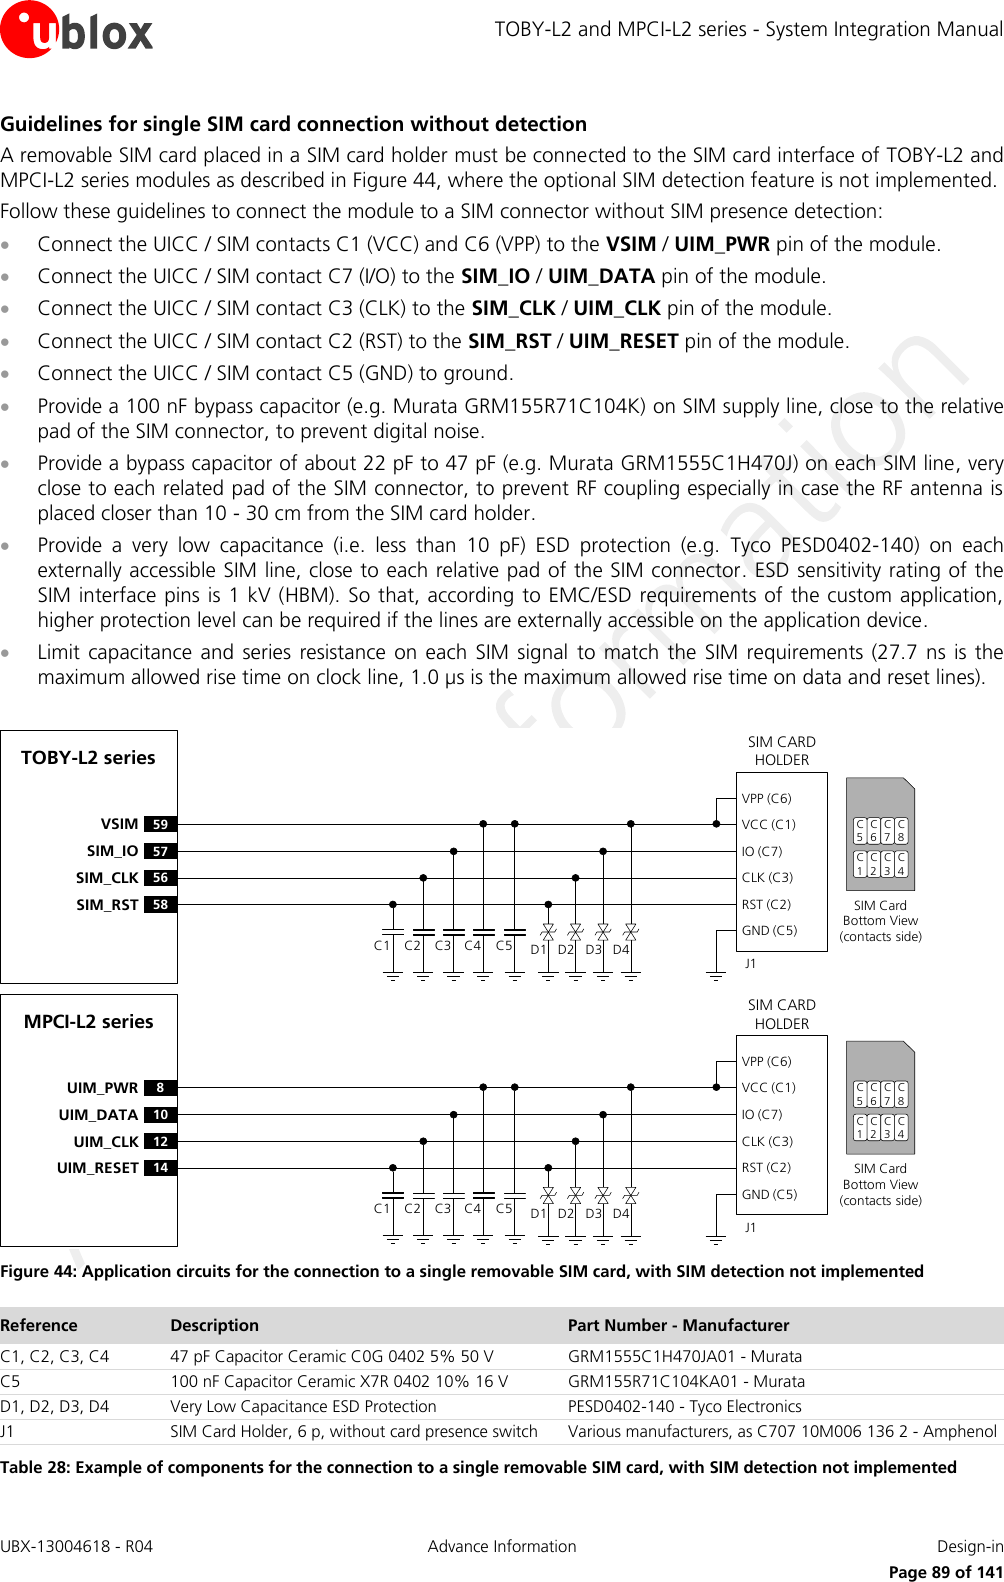 TOBY-L2 and MPCI-L2 series - System Integration Manual UBX-13004618 - R04  Advance Information  Design-in     Page 89 of 141 Guidelines for single SIM card connection without detection A removable SIM card placed in a SIM card holder must be connected to the SIM card interface of TOBY-L2 and MPCI-L2 series modules as described in Figure 44, where the optional SIM detection feature is not implemented. Follow these guidelines to connect the module to a SIM connector without SIM presence detection:  Connect the UICC / SIM contacts C1 (VCC) and C6 (VPP) to the VSIM / UIM_PWR pin of the module.  Connect the UICC / SIM contact C7 (I/O) to the SIM_IO / UIM_DATA pin of the module.  Connect the UICC / SIM contact C3 (CLK) to the SIM_CLK / UIM_CLK pin of the module.  Connect the UICC / SIM contact C2 (RST) to the SIM_RST / UIM_RESET pin of the module.  Connect the UICC / SIM contact C5 (GND) to ground.  Provide a 100 nF bypass capacitor (e.g. Murata GRM155R71C104K) on SIM supply line, close to the relative pad of the SIM connector, to prevent digital noise.  Provide a bypass capacitor of about 22 pF to 47 pF (e.g. Murata GRM1555C1H470J) on each SIM line, very close to each related pad of the SIM connector, to prevent RF coupling especially in case the RF antenna is placed closer than 10 - 30 cm from the SIM card holder.  Provide  a  very  low  capacitance  (i.e.  less  than  10  pF)  ESD  protection  (e.g.  Tyco  PESD0402-140)  on  each externally accessible SIM line, close to each relative pad of the SIM connector. ESD sensitivity rating of the SIM interface pins is 1 kV (HBM). So that, according to EMC/ESD requirements of the custom application, higher protection level can be required if the lines are externally accessible on the application device.  Limit capacitance  and  series  resistance  on each  SIM  signal to  match  the  SIM requirements (27.7  ns  is  the maximum allowed rise time on clock line, 1.0 µs is the maximum allowed rise time on data and reset lines).  TOBY-L2 series59VSIM57SIM_IO56SIM_CLK58SIM_RSTSIM CARD HOLDERC5C6C7C1C2C3SIM Card Bottom View (contacts side)C1VPP (C6)VCC (C1)IO (C7)CLK (C3)RST (C2)GND (C5)C2 C3 C5J1C4 D1 D2 D3 D4C8C4MPCI-L2 series8UIM_PWR10UIM_DATA12UIM_CLK14UIM_RESETSIM CARD HOLDERC5C6C7C1C2C3SIM Card Bottom View (contacts side)C1VPP (C6)VCC (C1)IO (C7)CLK (C3)RST (C2)GND (C5)C2 C3 C5J1C4 D1 D2 D3 D4C8C4 Figure 44: Application circuits for the connection to a single removable SIM card, with SIM detection not implemented Reference Description Part Number - Manufacturer C1, C2, C3, C4 47 pF Capacitor Ceramic C0G 0402 5% 50 V GRM1555C1H470JA01 - Murata C5 100 nF Capacitor Ceramic X7R 0402 10% 16 V GRM155R71C104KA01 - Murata D1, D2, D3, D4 Very Low Capacitance ESD Protection PESD0402-140 - Tyco Electronics  J1 SIM Card Holder, 6 p, without card presence switch Various manufacturers, as C707 10M006 136 2 - Amphenol Table 28: Example of components for the connection to a single removable SIM card, with SIM detection not implemented 